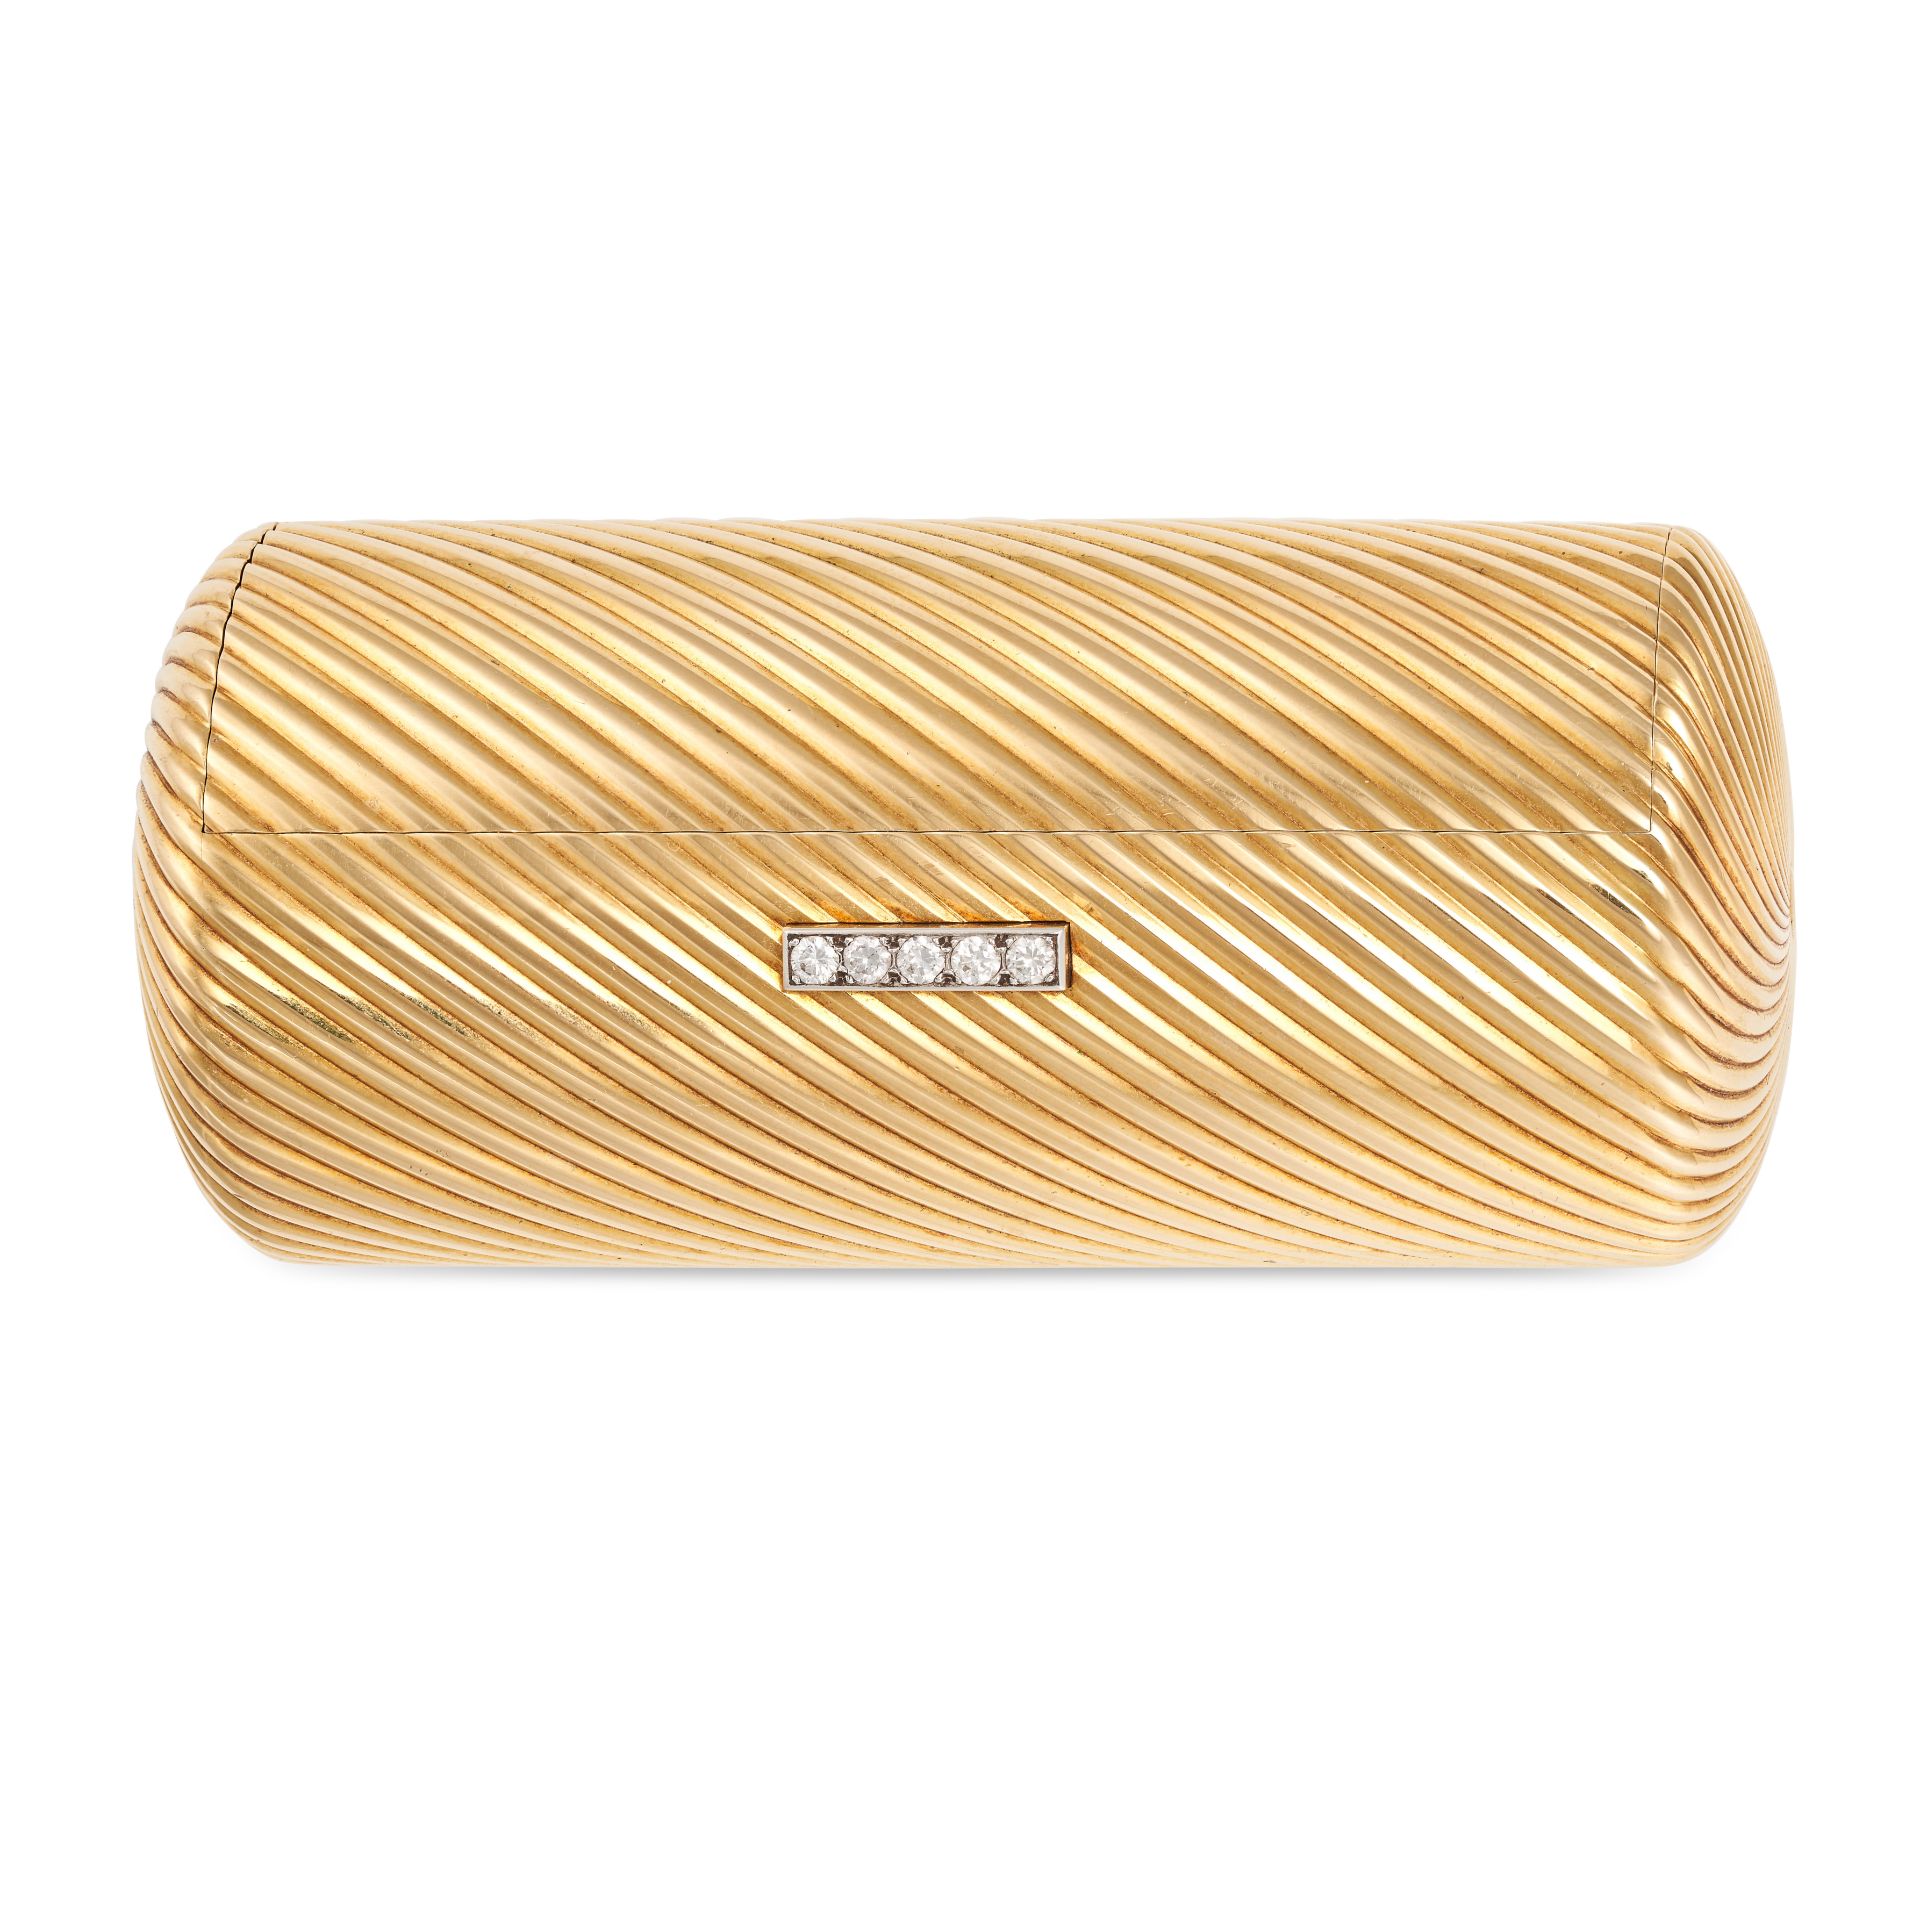 CARTIER, A VINTAGE DIAMOND CIGARETTE CASE, 1954 in 18ct yellow gold, the cylindrical fluted body ... - Image 2 of 2